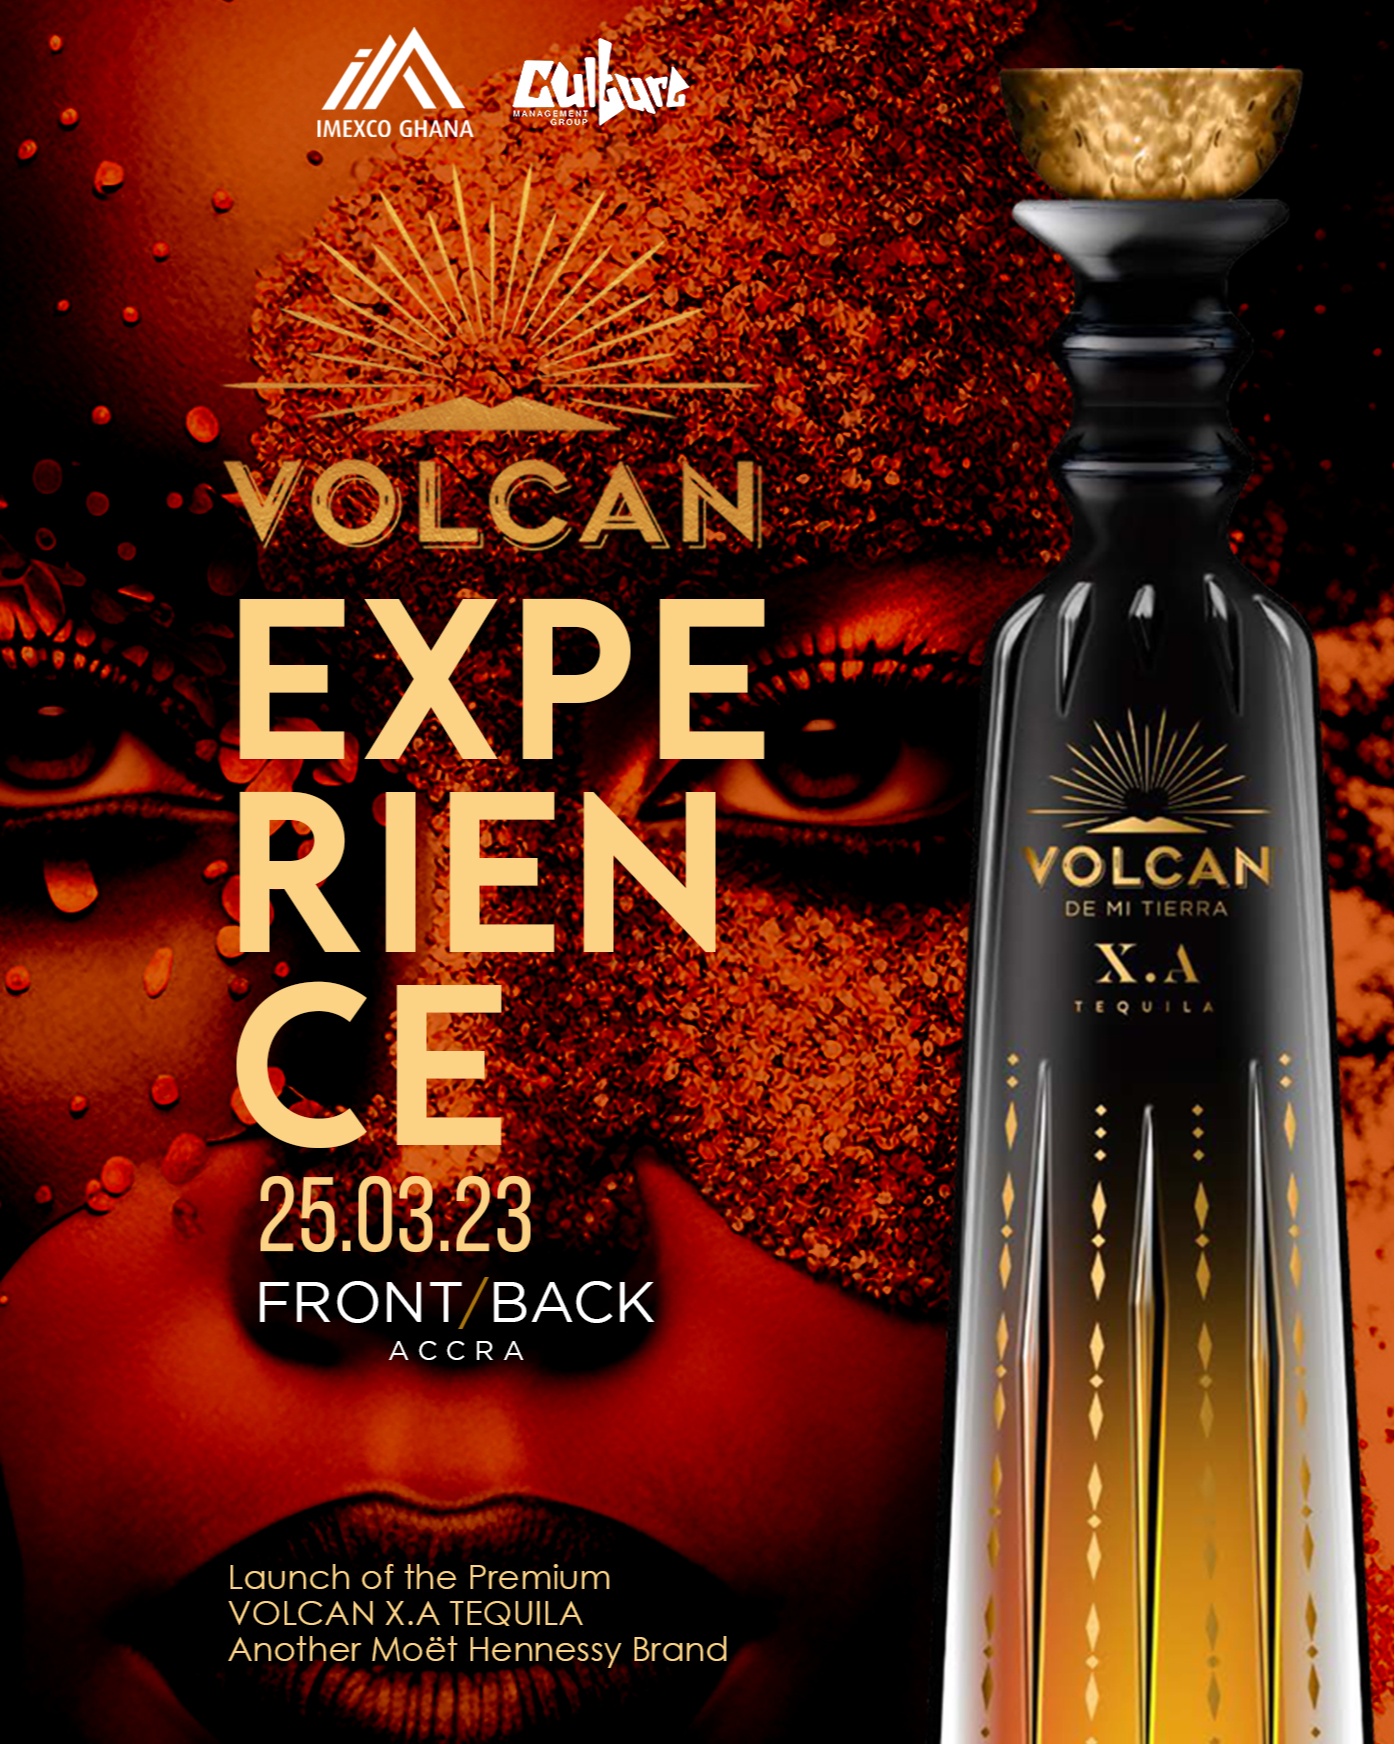 Volcan Experience at FrontBack, Osu, Accra, Mar 25, 2023